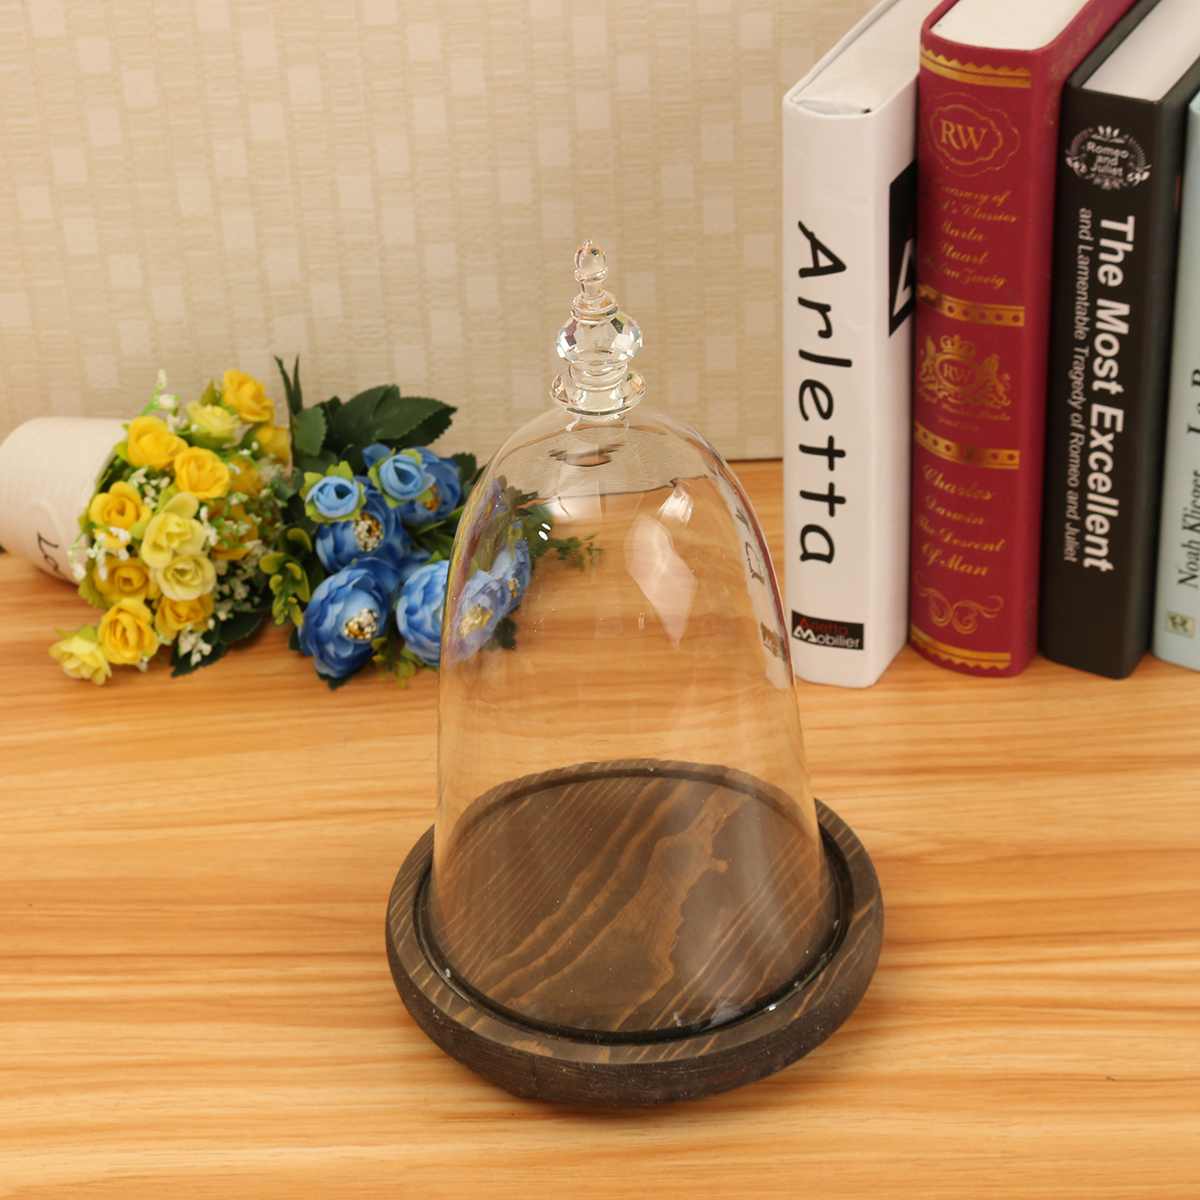 Home Decor Vases Glass Flower Display Cloche Bell Jar Dome Immortal Preservation With Wooden Base Everlasting Flower Glass Cover